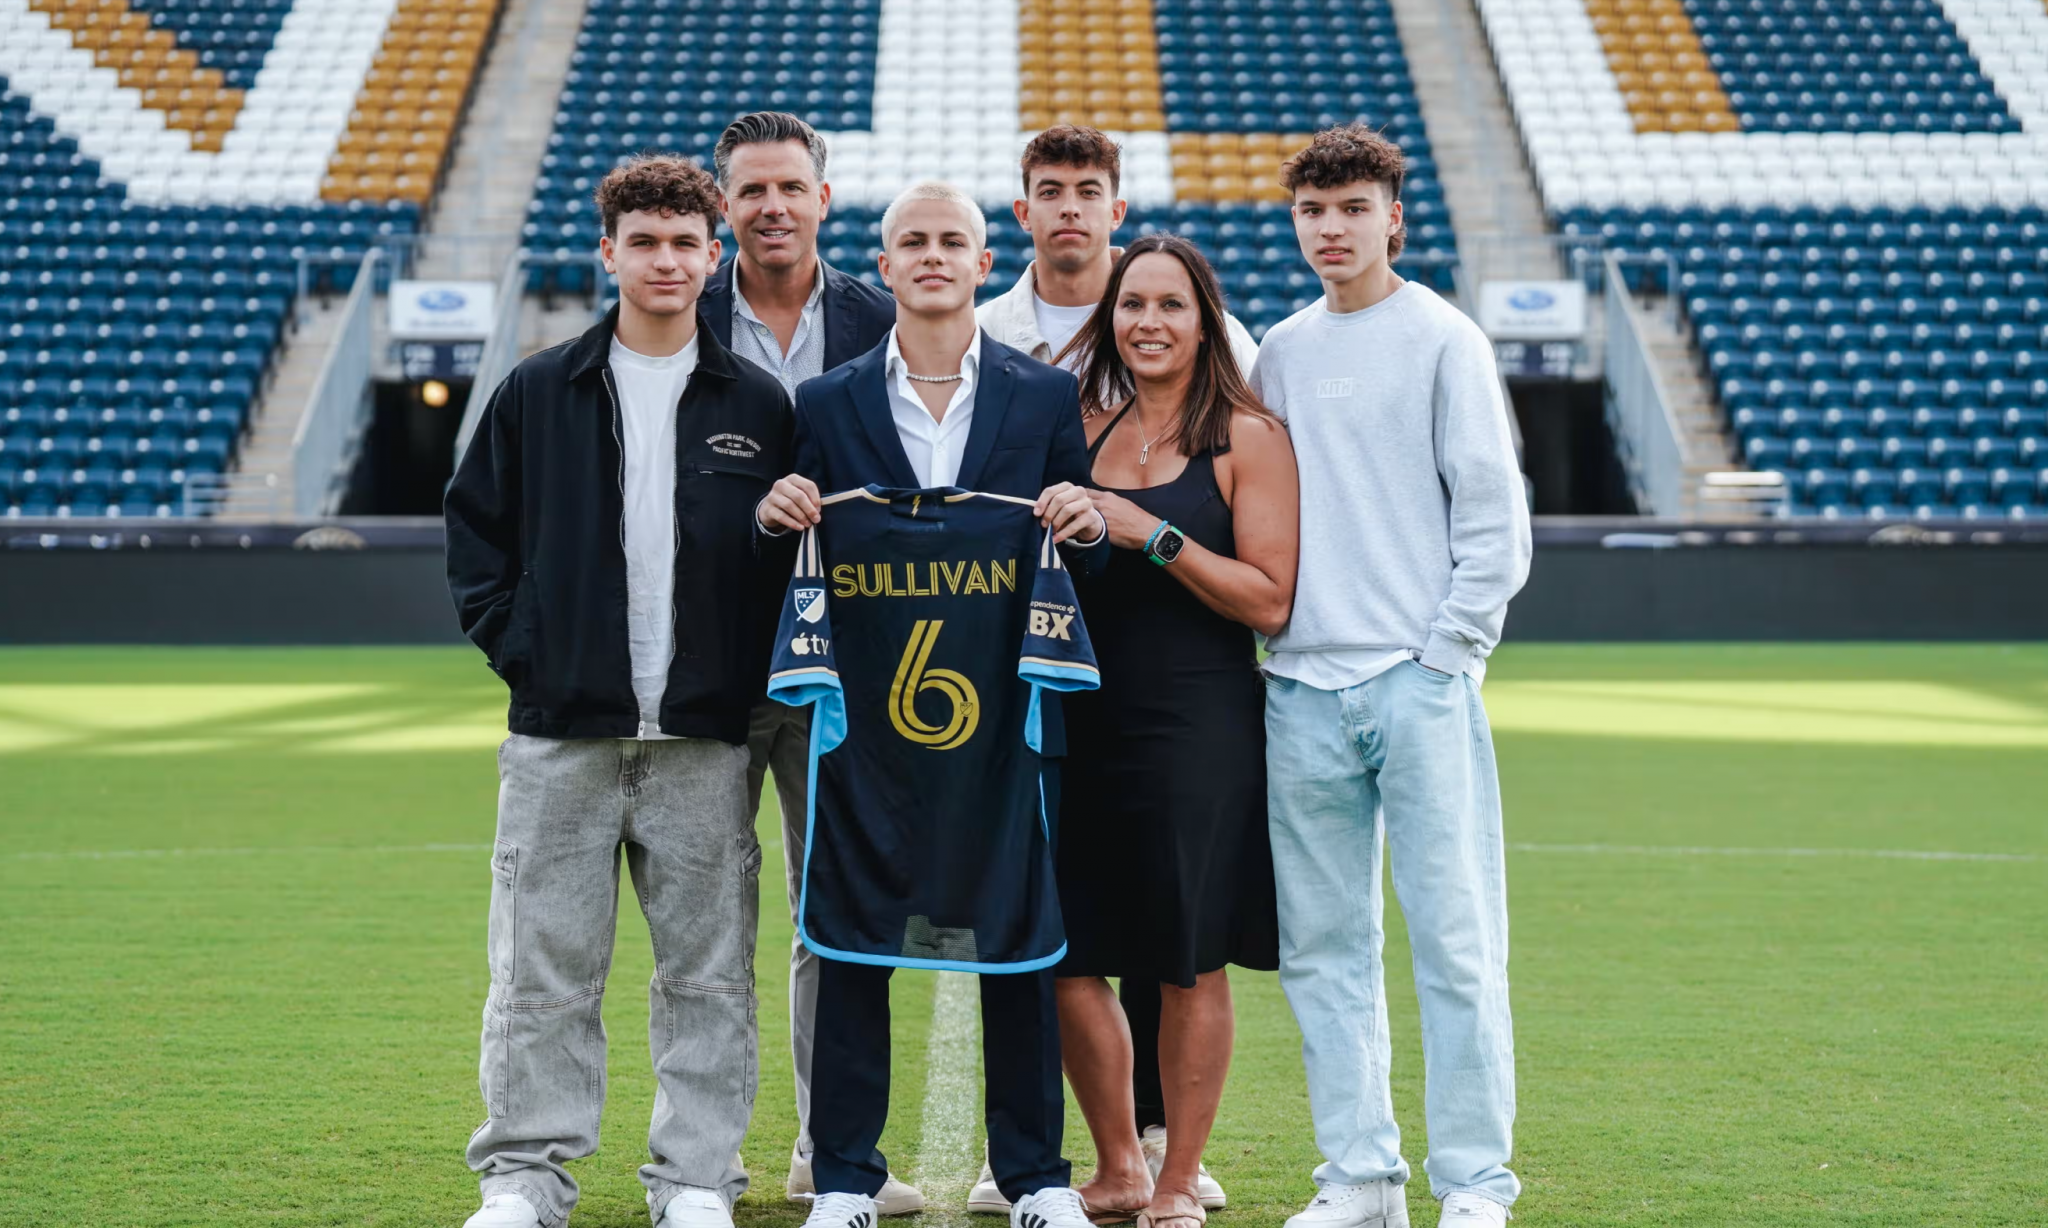 Sullivan has penned a deal with Philadelphia Union which includes a move to Man City when he turns 18. Philadelphia Union